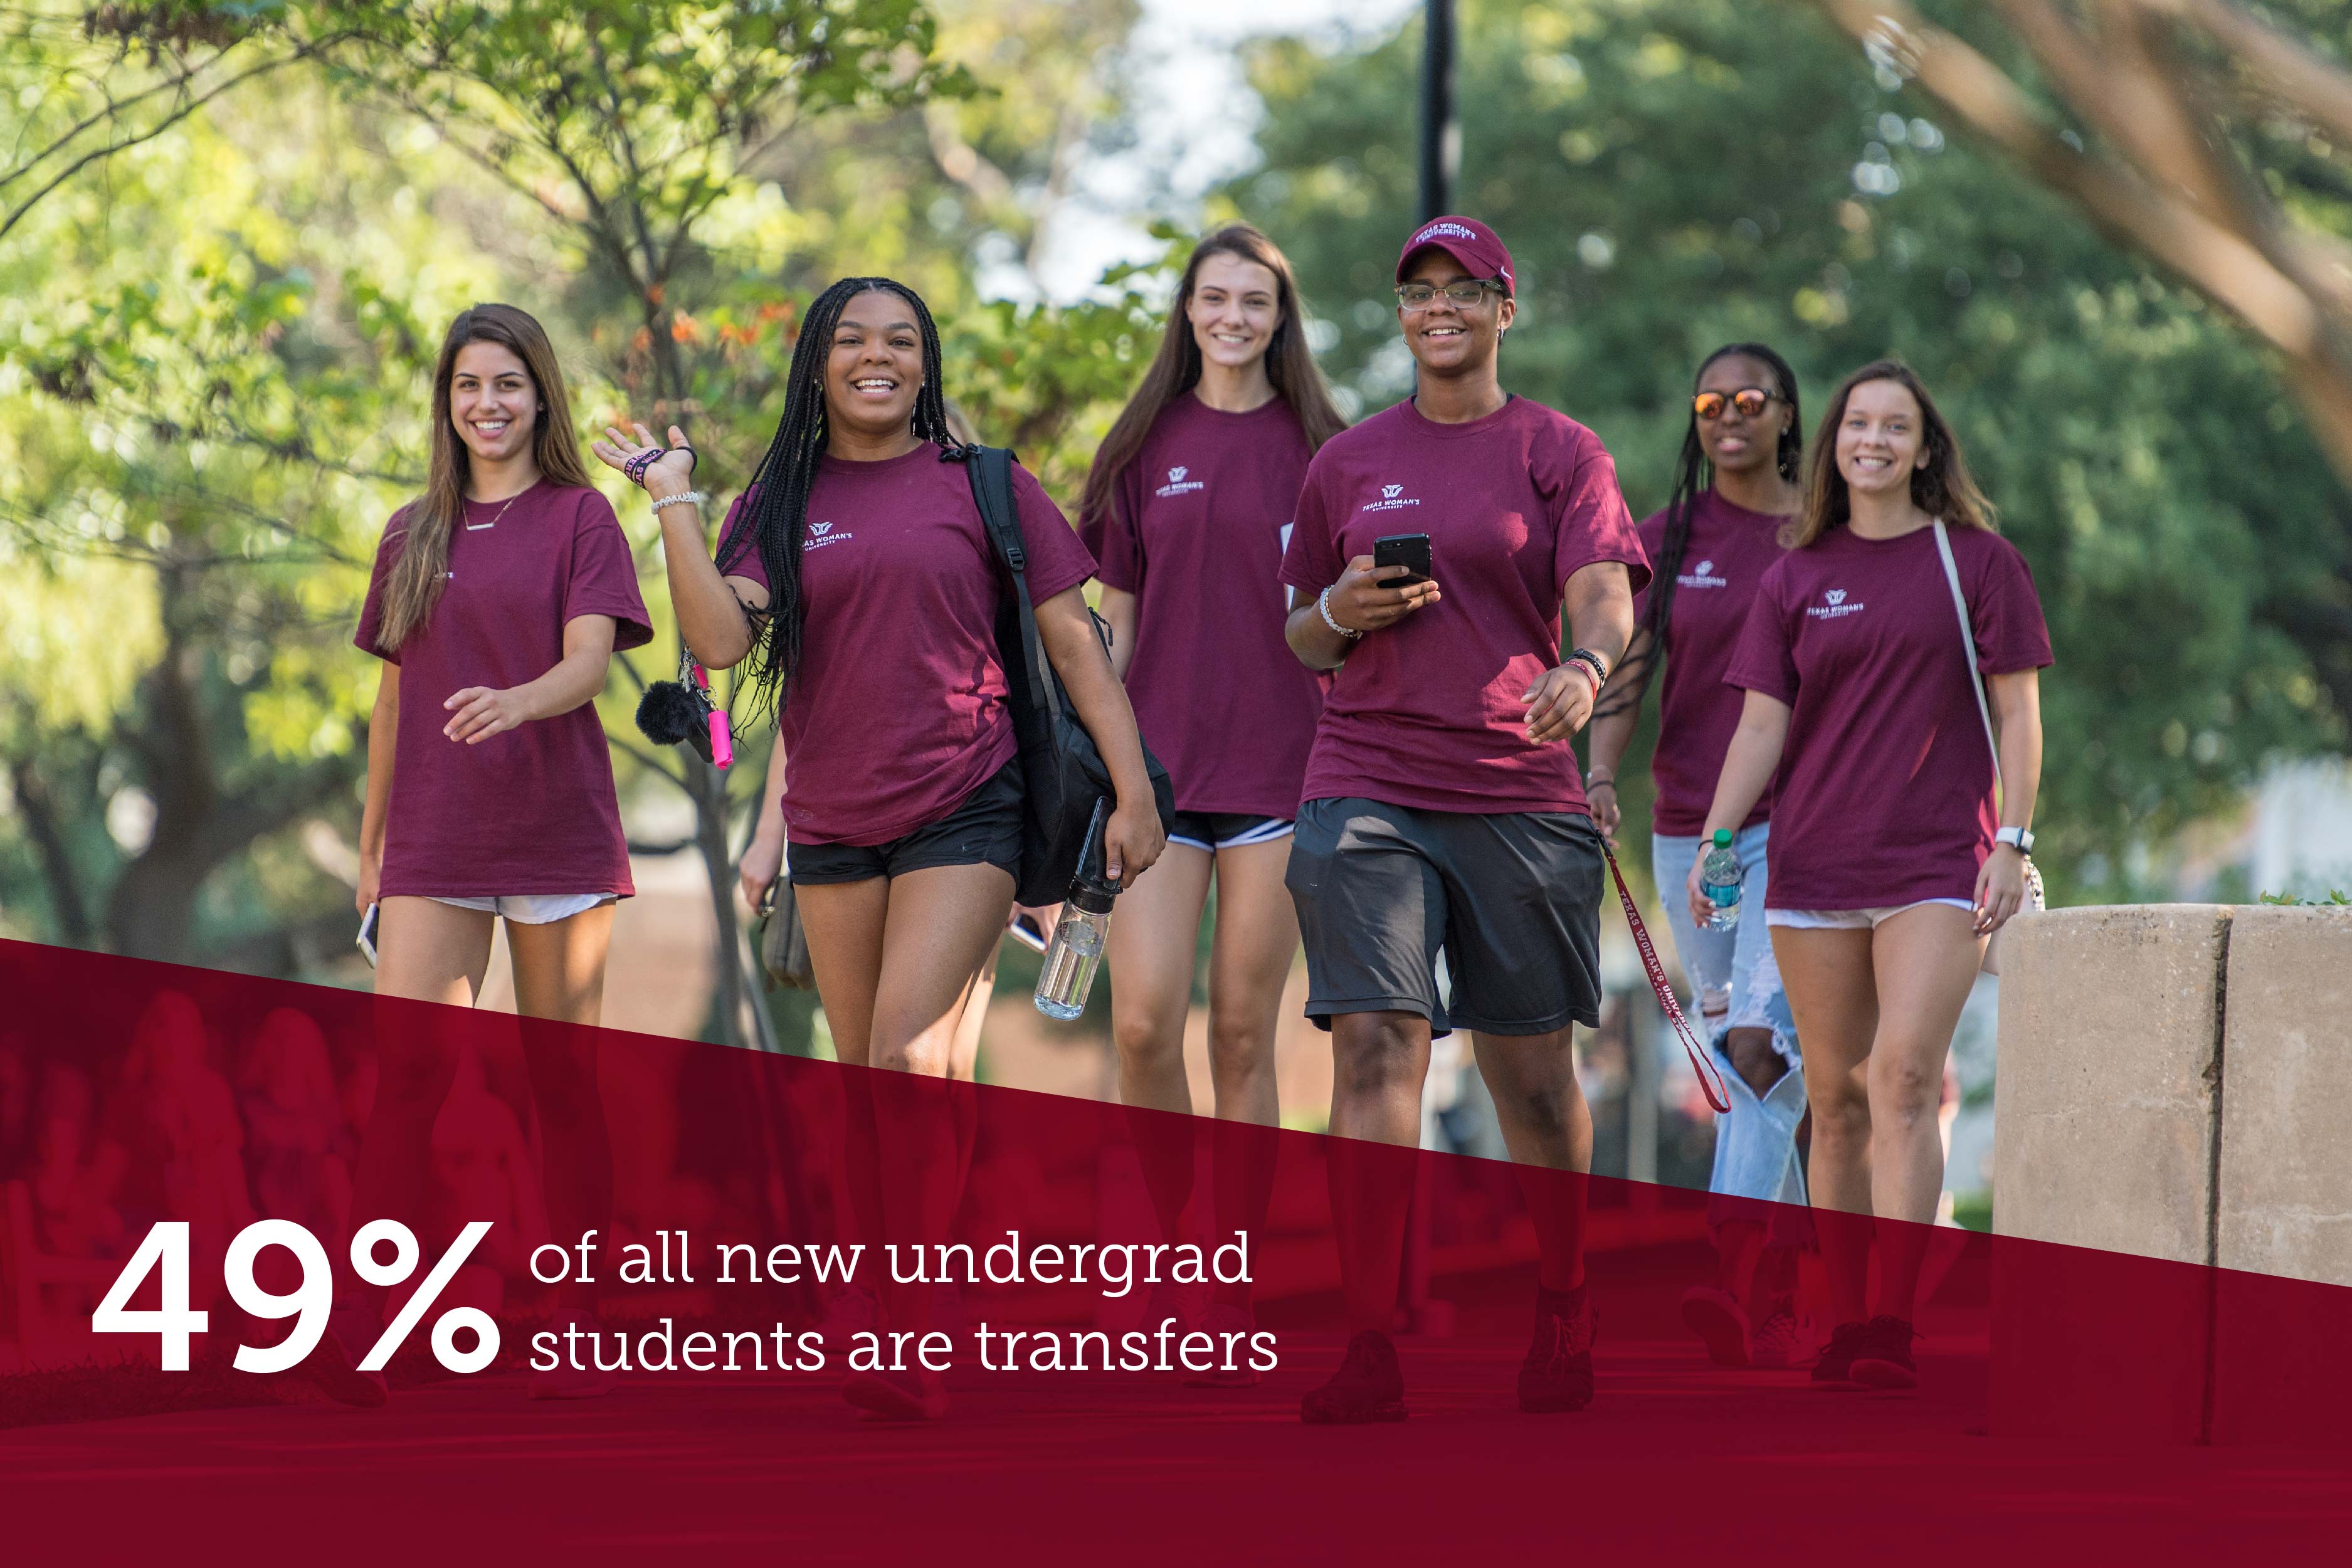 A group of TWU students relax on the lawn with university facts displayed below of "15,000+ total students" and "130+ student organizations".